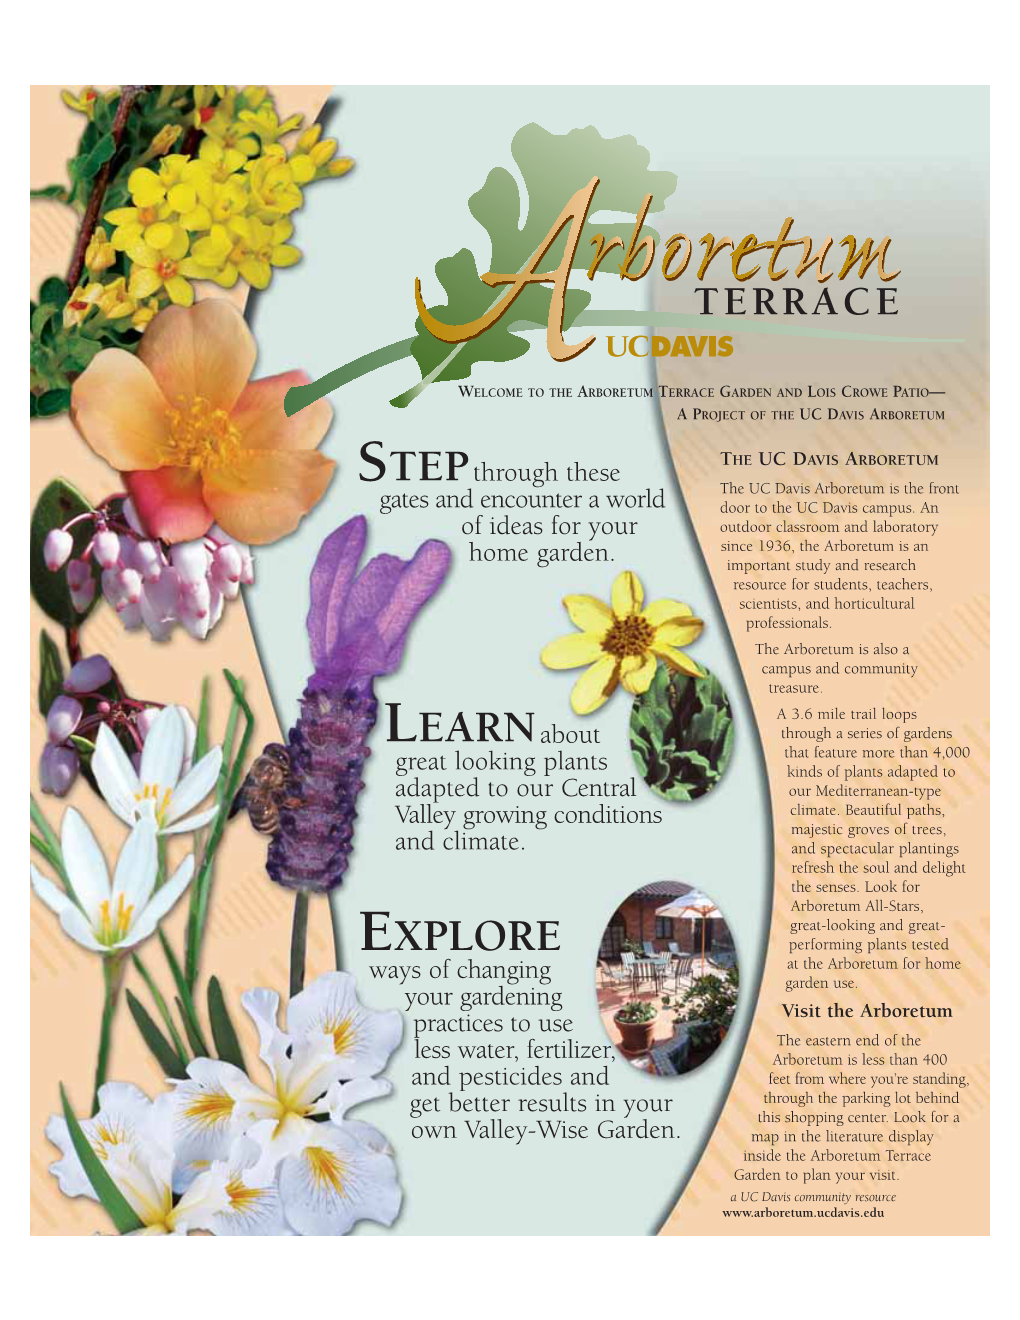 DOWNLOAD a .Pdf of All the Terrace Garden Exhibit Signs